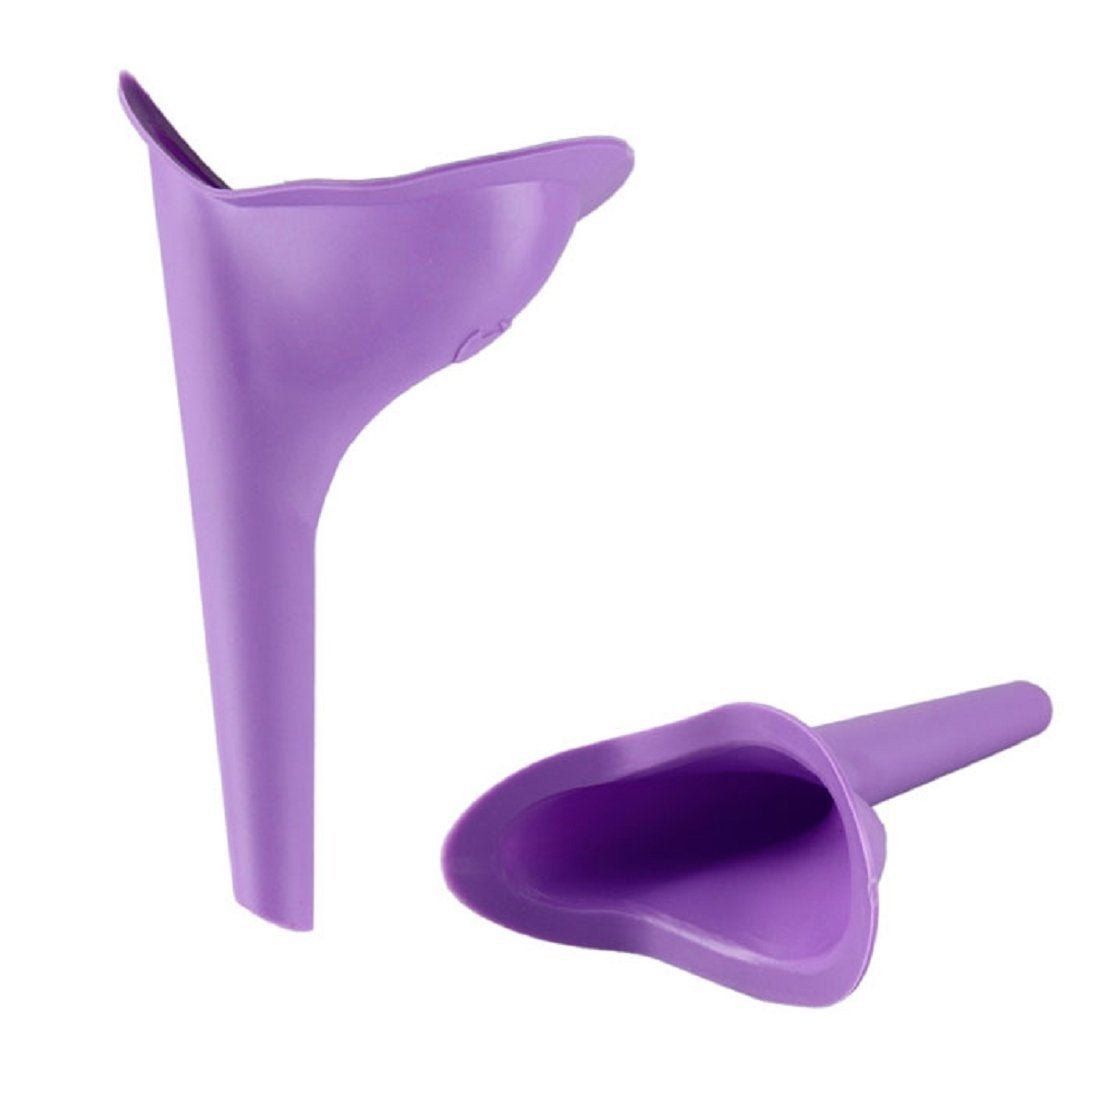 Female Urinal Silicone Funnel Urine Cups Portable for Female Urination Device 